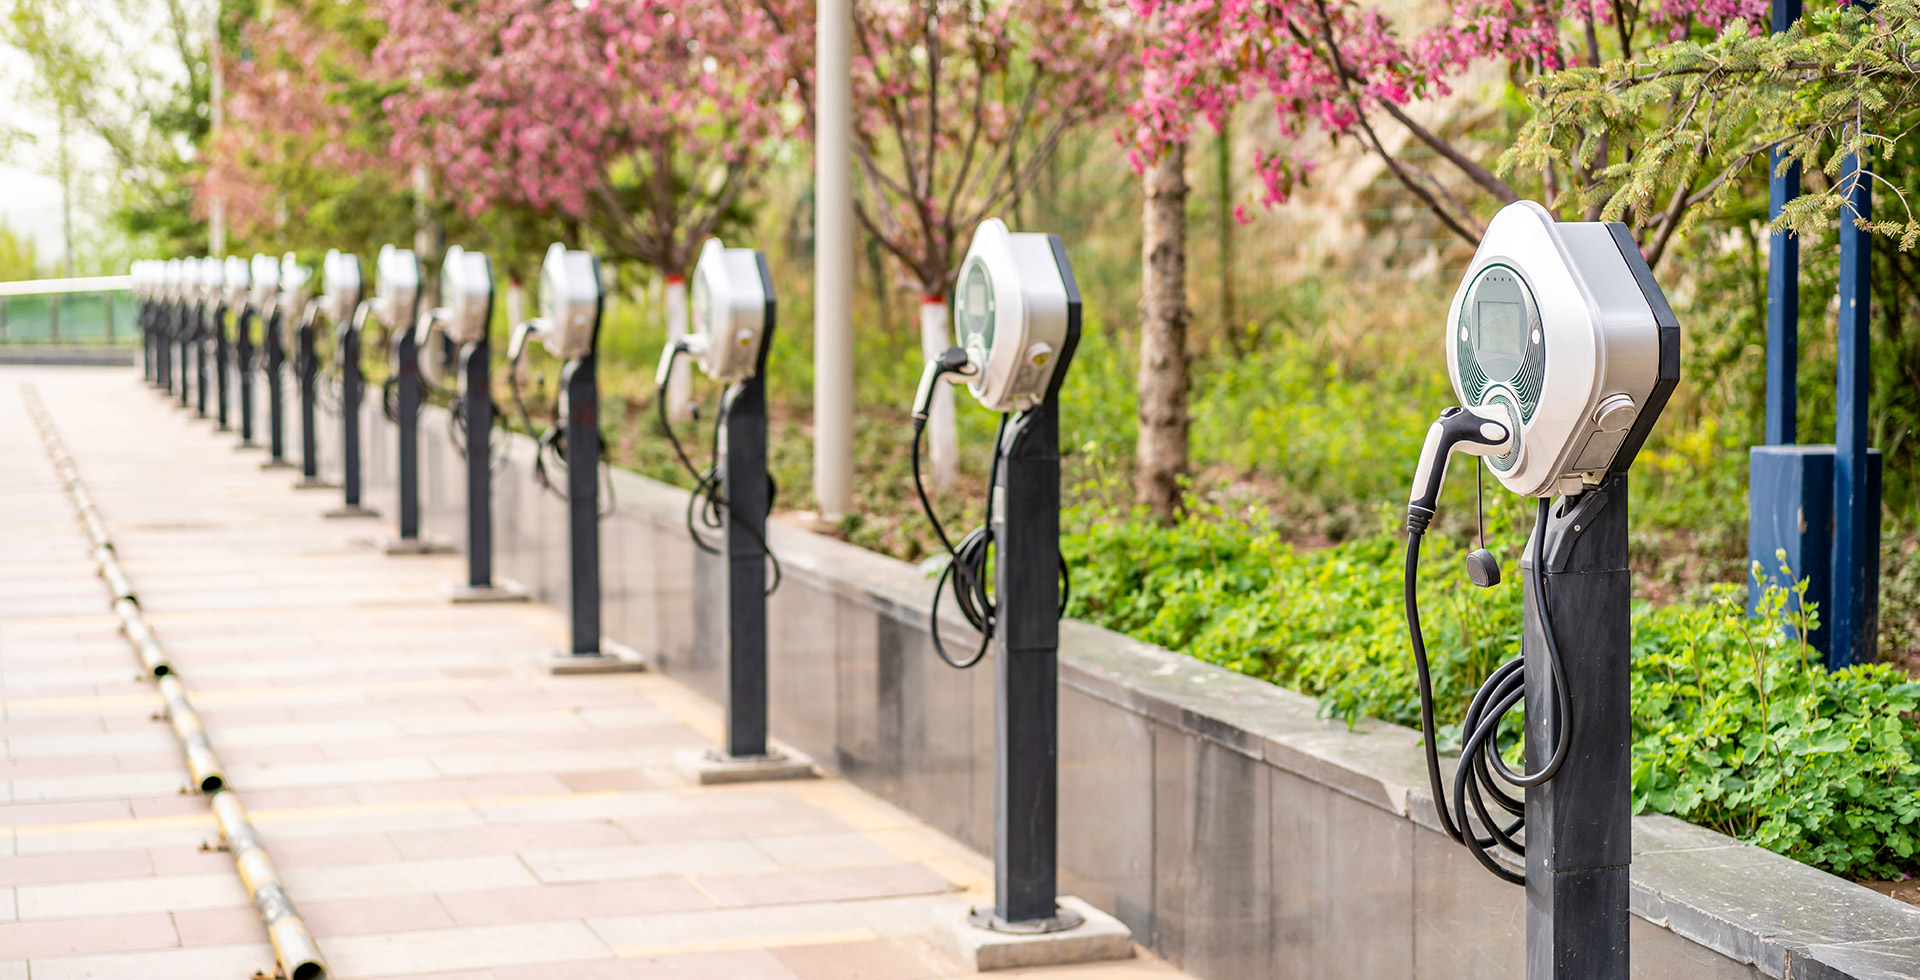 Electric vehicles charging station are installed in city public square